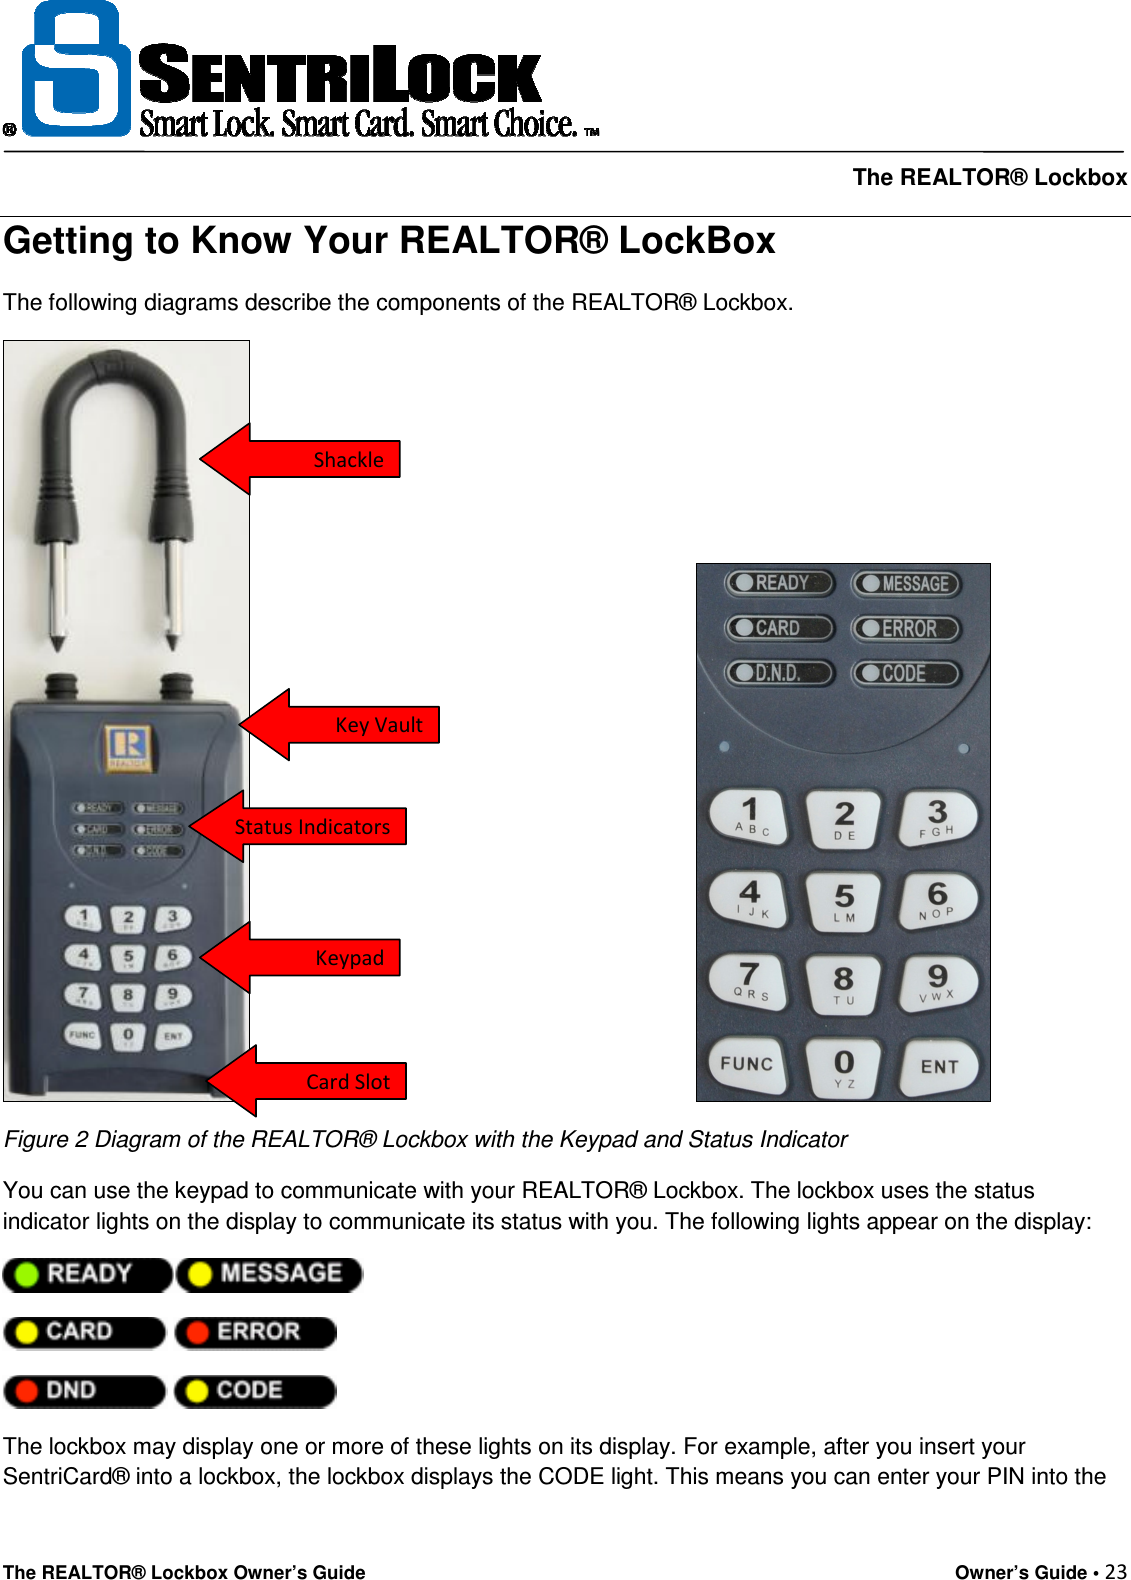     The REALTOR® Lockbox The REALTOR® Lockbox Owner’s Guide    Owner’s Guide • 23  Getting to Know Your REALTOR® LockBox The following diagrams describe the components of the REALTOR® Lockbox.                                                                         Figure 2 Diagram of the REALTOR® Lockbox with the Keypad and Status Indicator  You can use the keypad to communicate with your REALTOR® Lockbox. The lockbox uses the status indicator lights on the display to communicate its status with you. The following lights appear on the display:         The lockbox may display one or more of these lights on its display. For example, after you insert your SentriCard® into a lockbox, the lockbox displays the CODE light. This means you can enter your PIN into the Shackle Key Vault Status Indicators Keypad Card Slot 